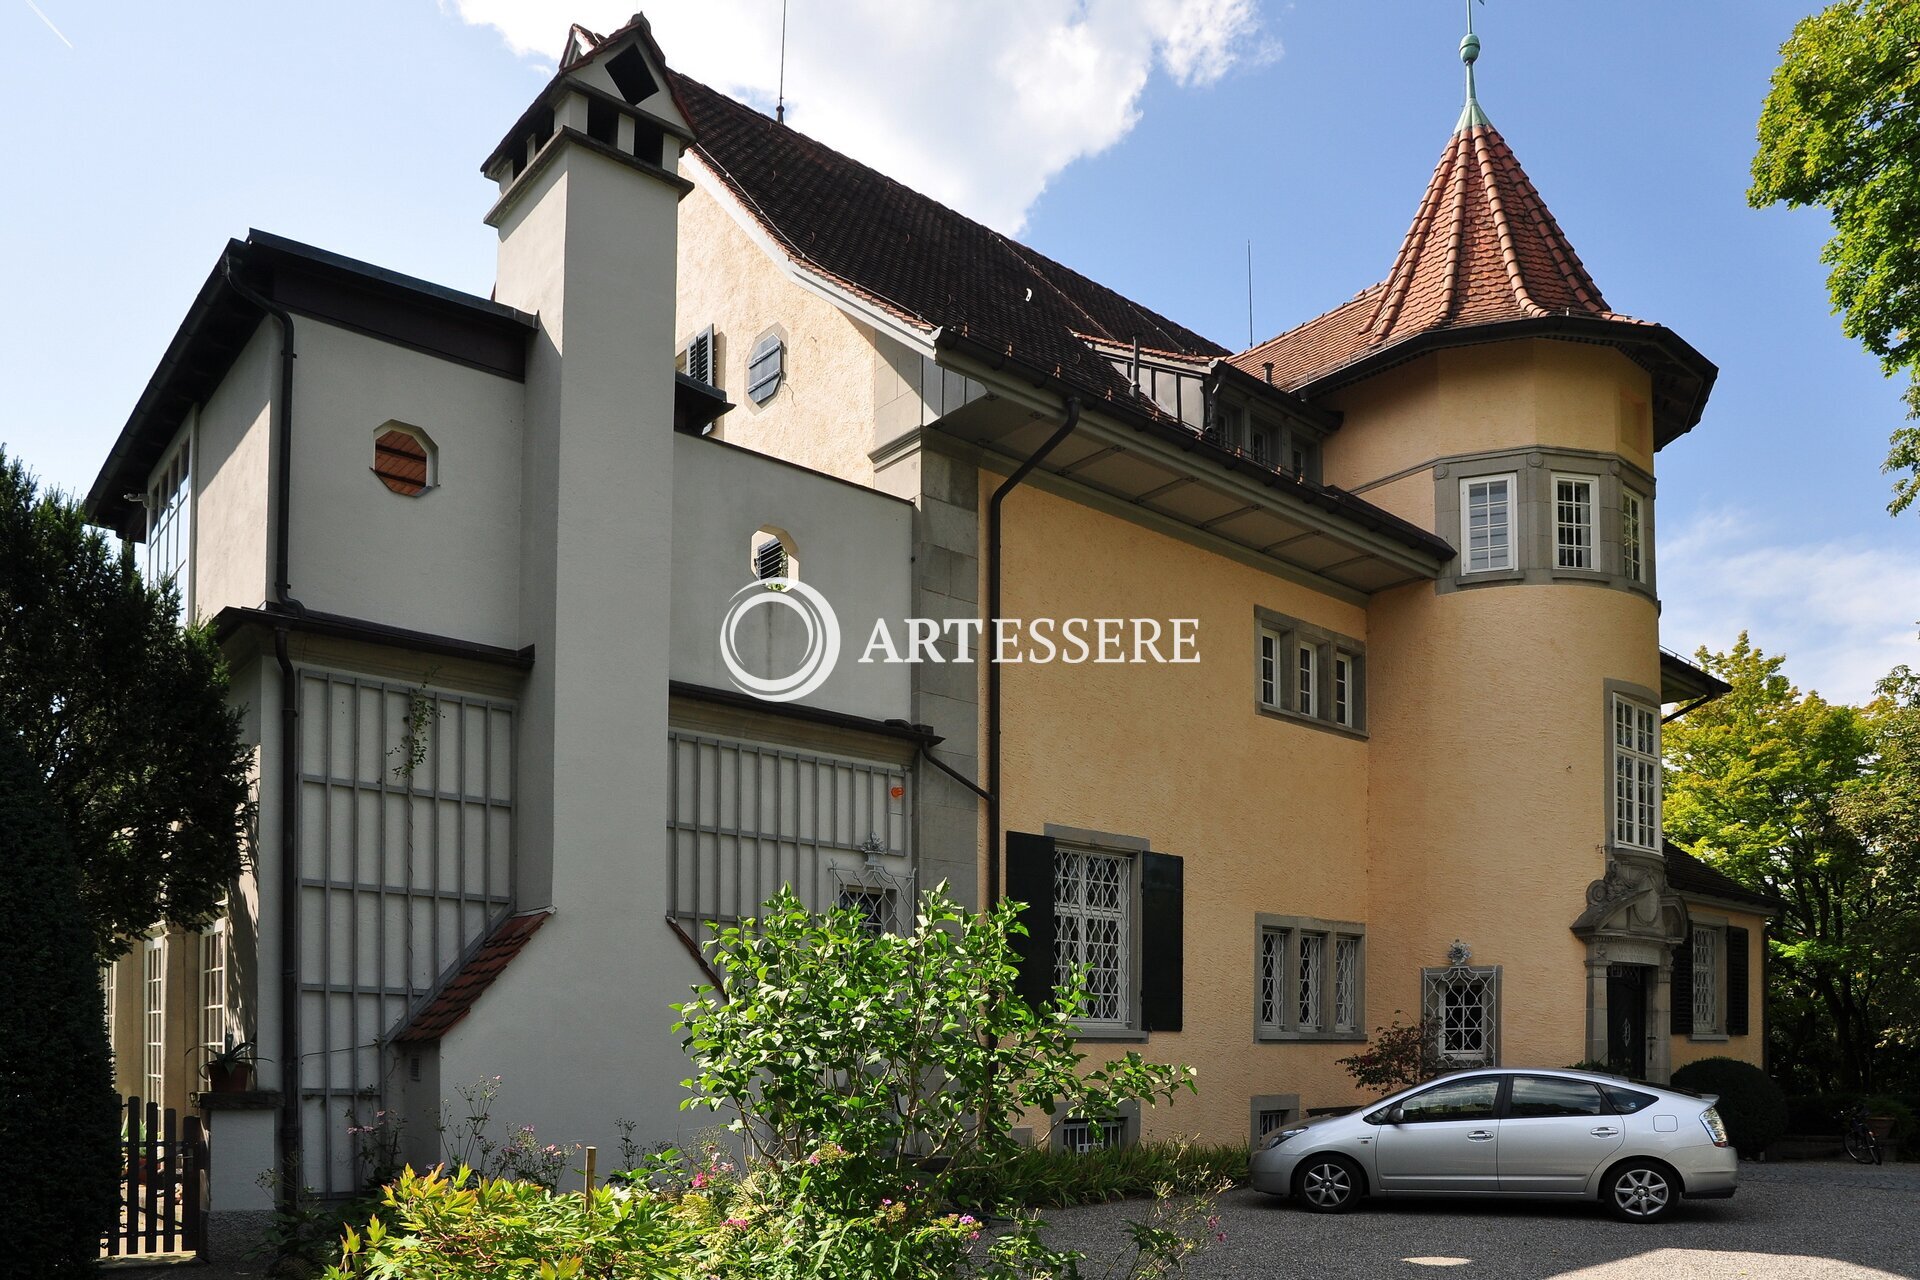 Carl Jung′s House